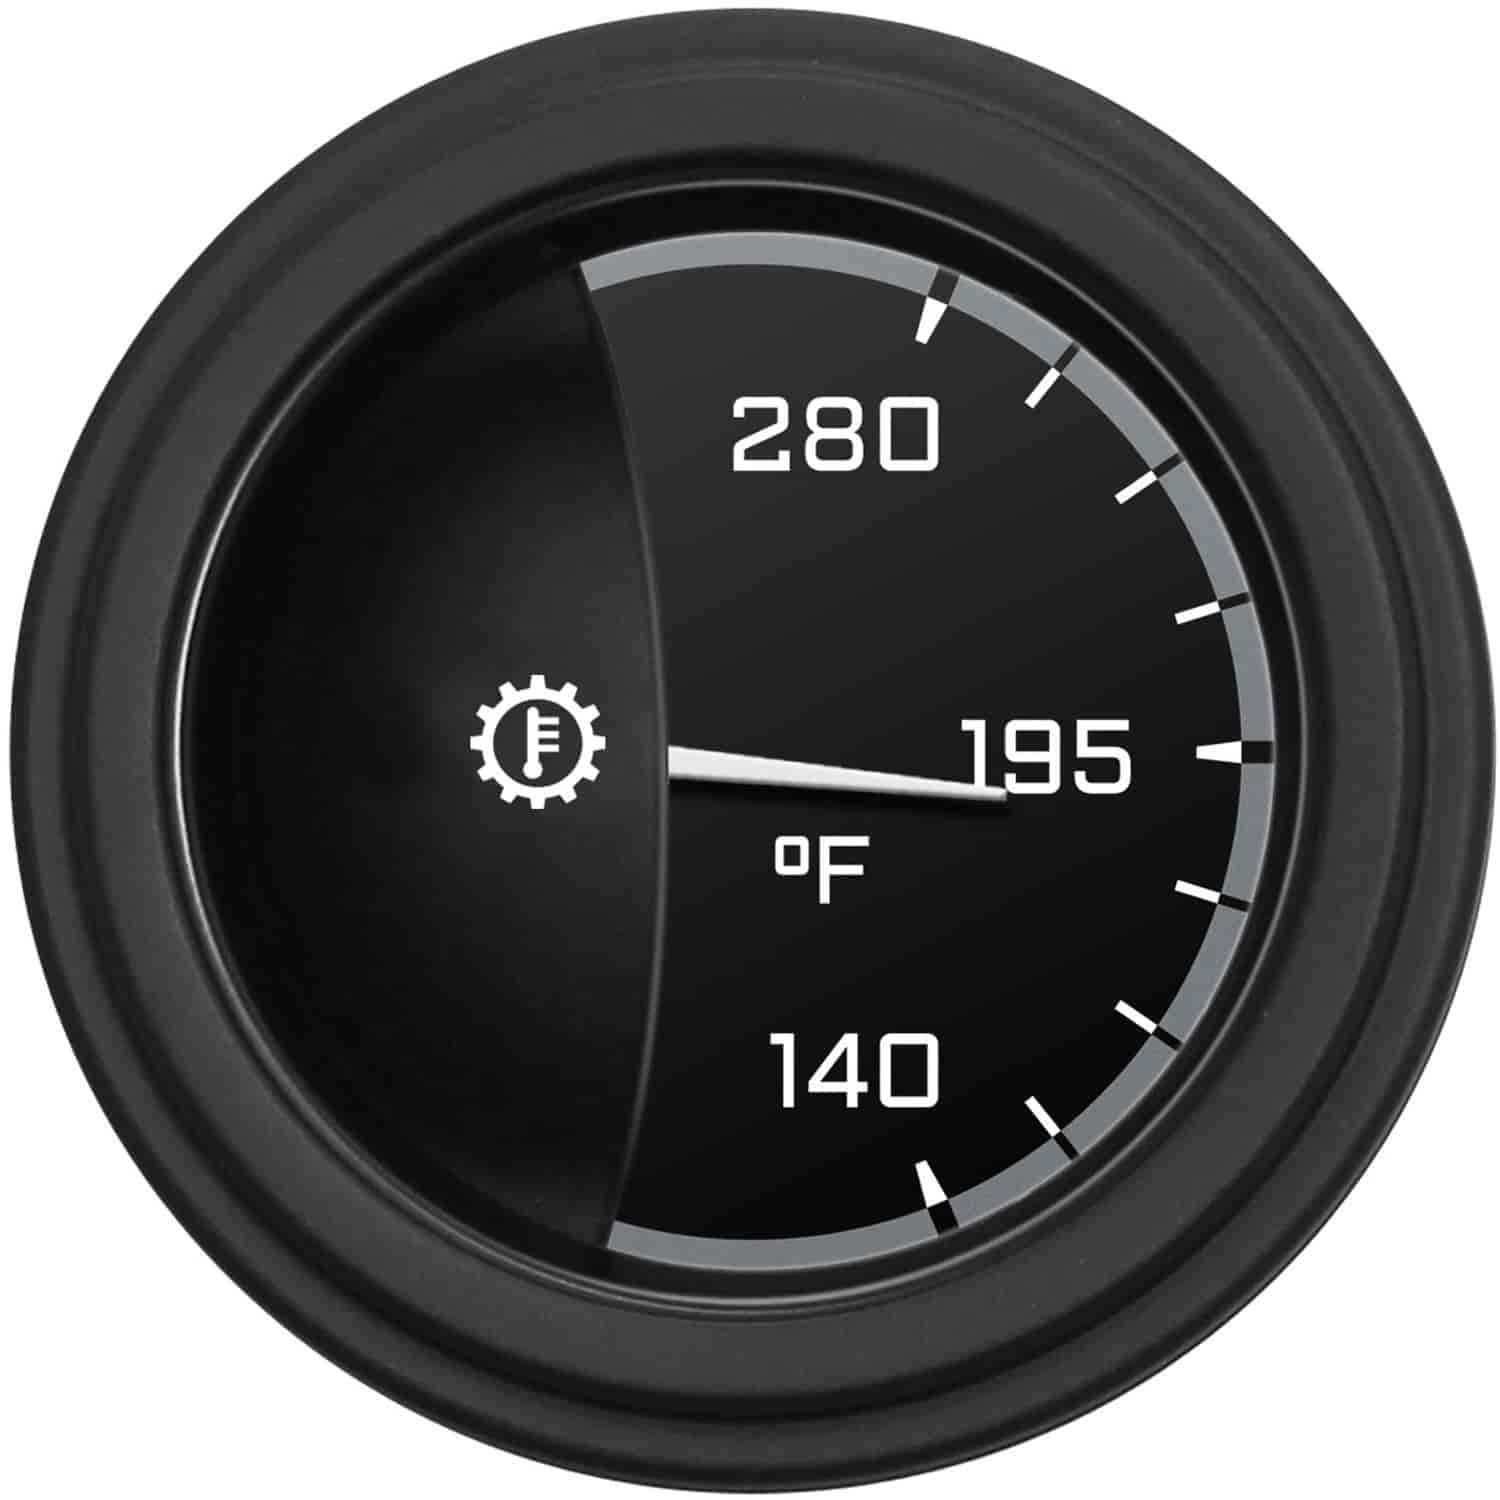 Gray AutoCross Series Transmission Temperature Gauge 2-1/8" Electrical